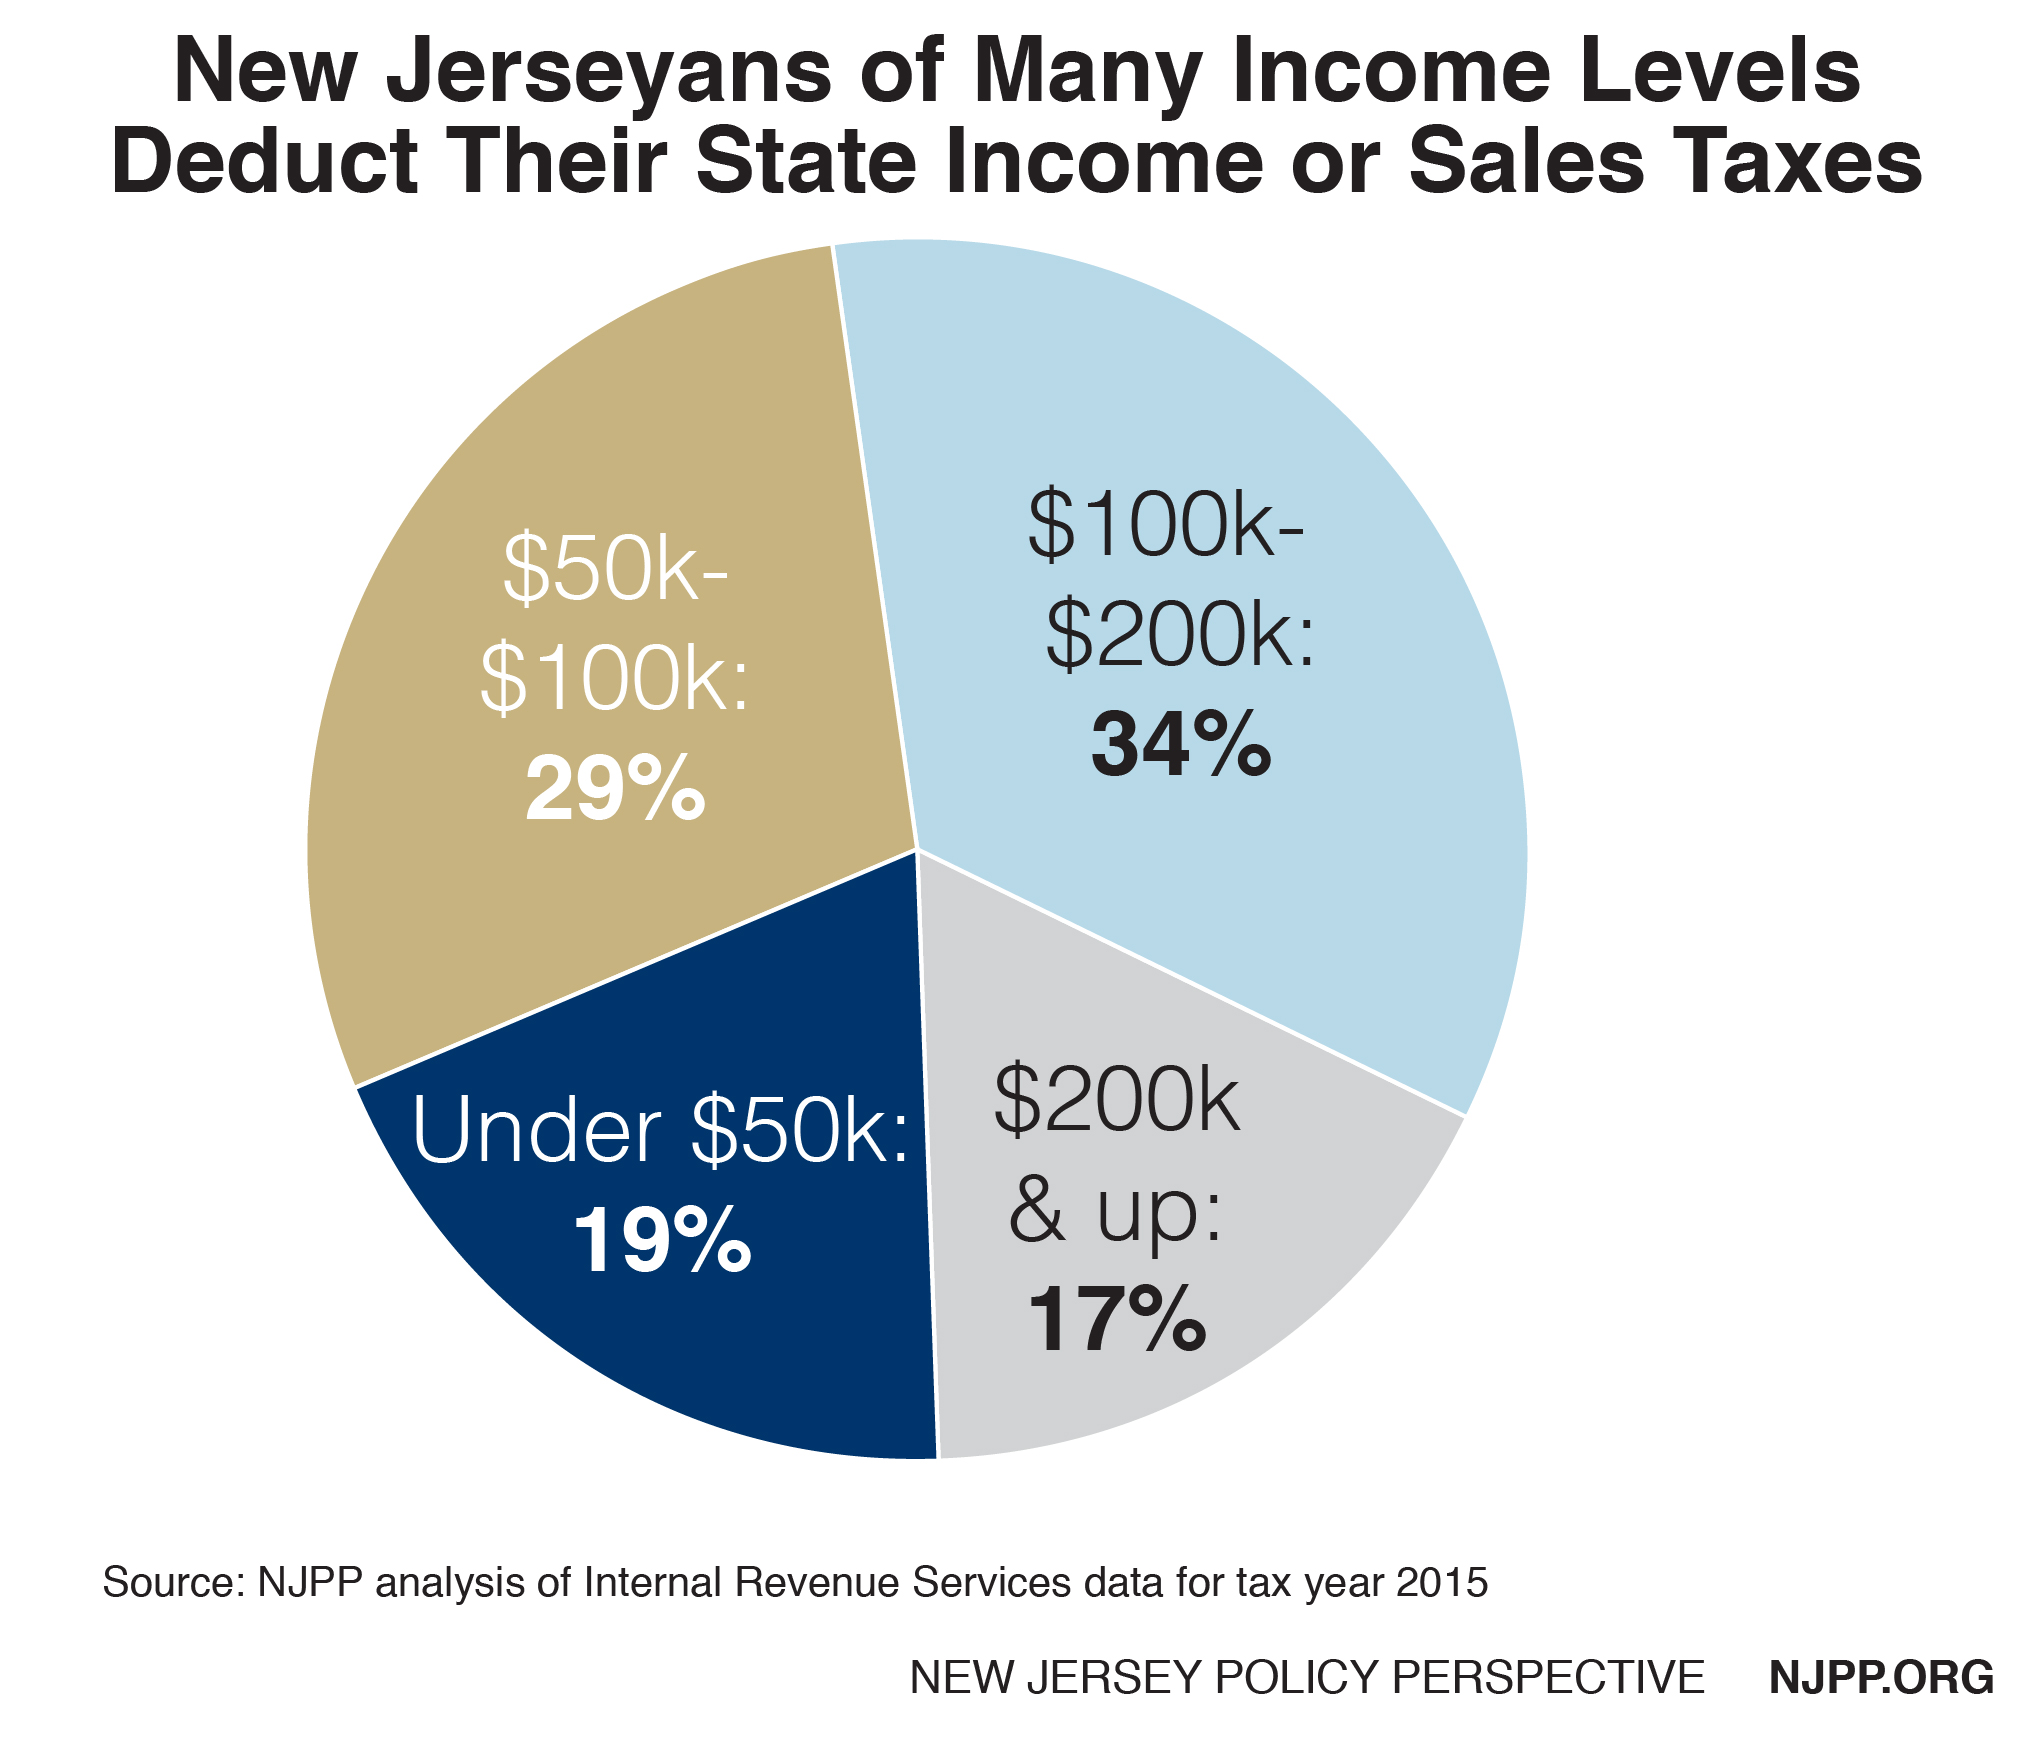 fast-facts-millions-of-new-jerseyans-deduct-billions-in-state-local